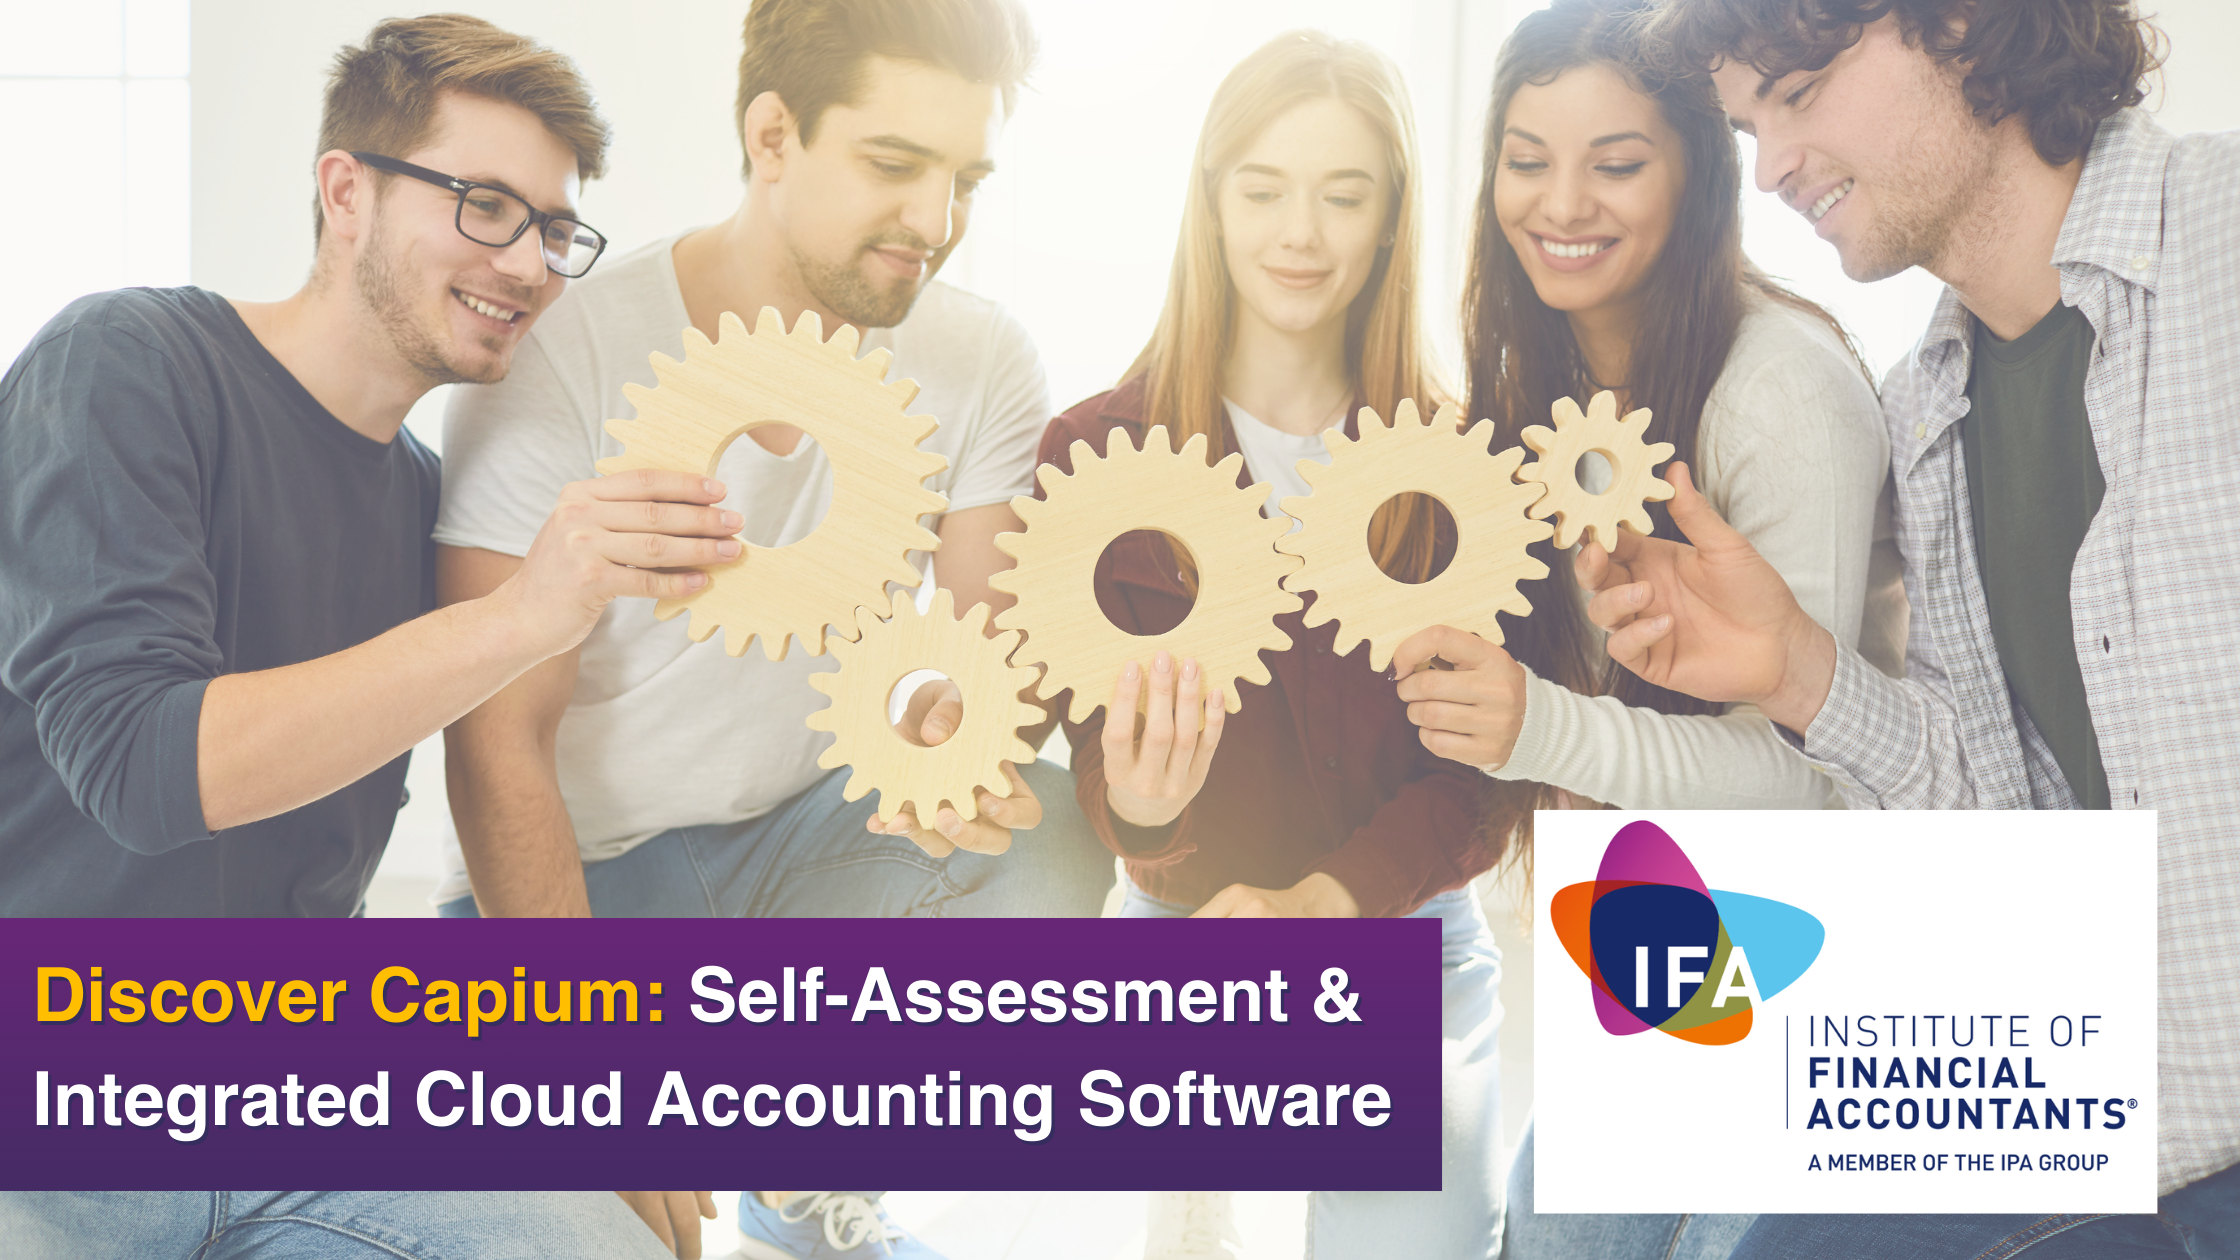 Discover Capium: Self-Assessment & Integrated Cloud Accounting Software image